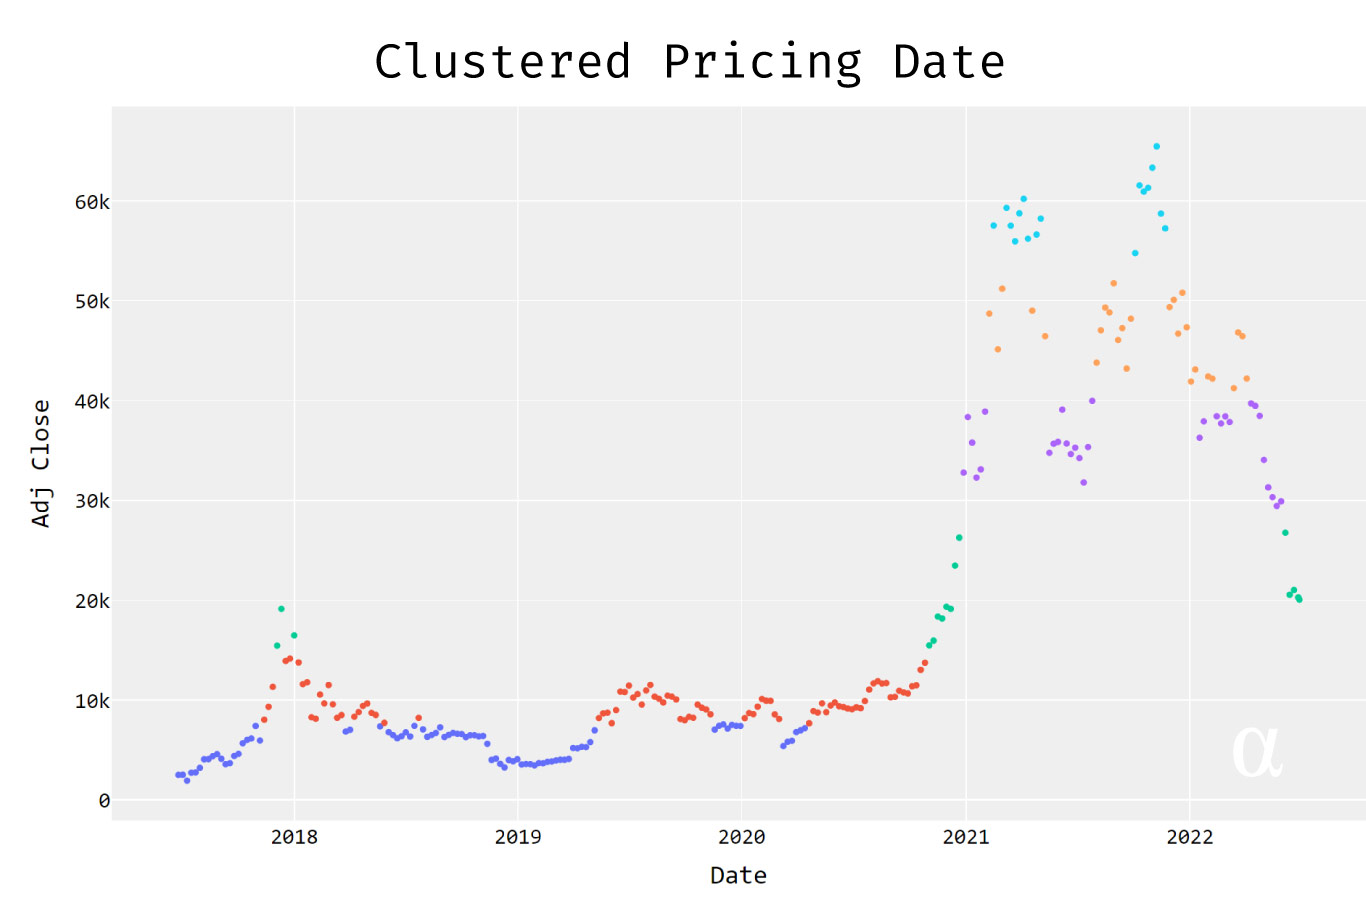 colorized btc weekly pricing data kmeans clusters alpharithms